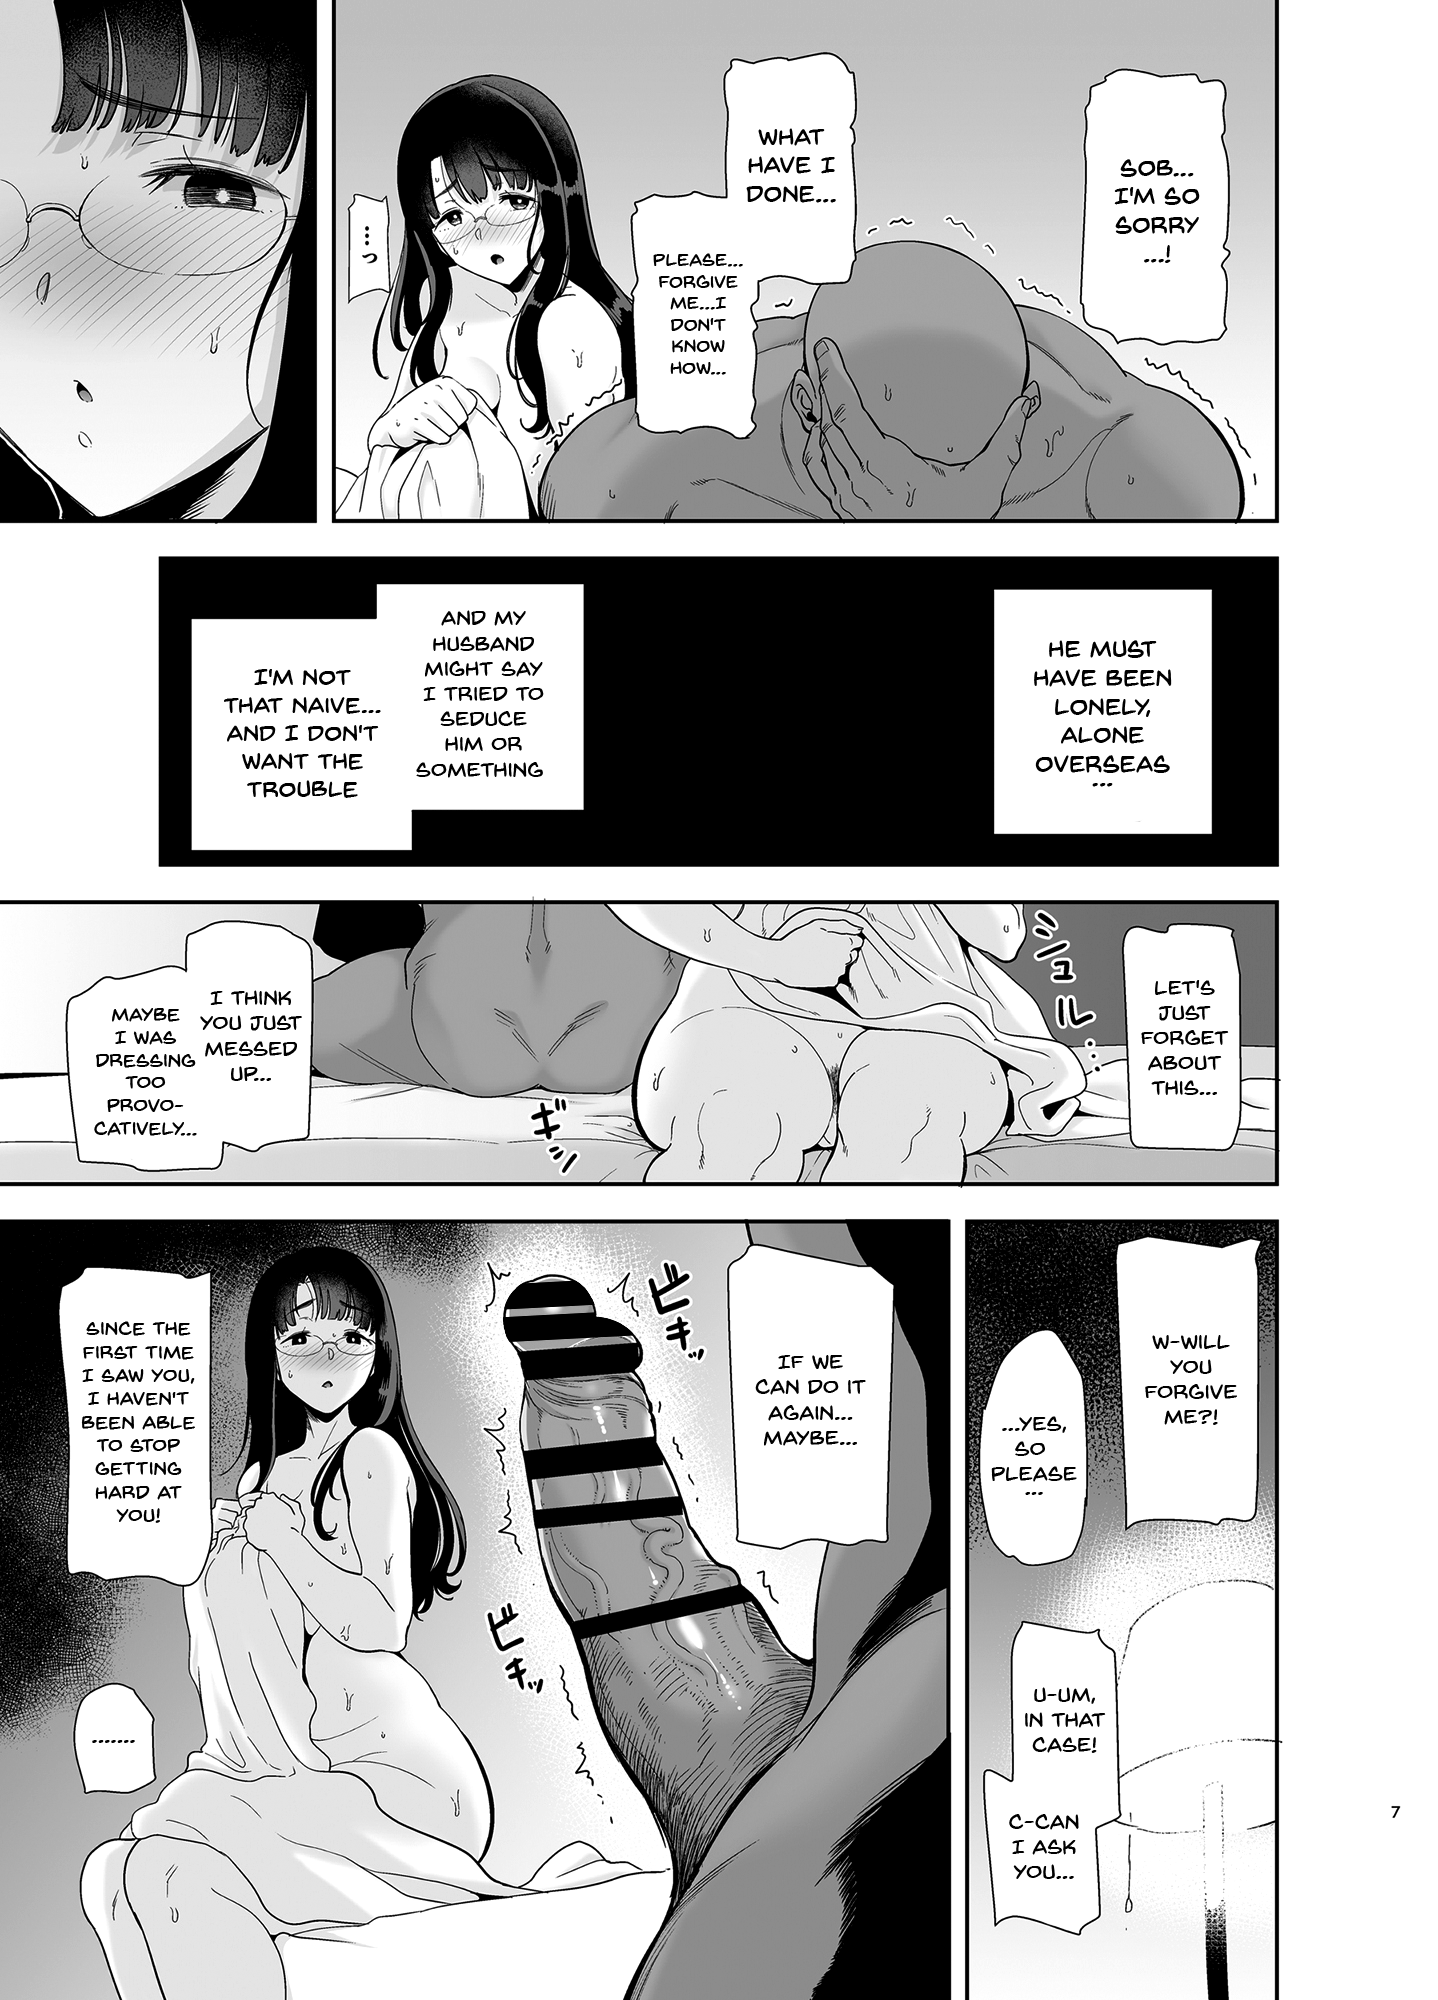 Wild Method 1 - Busty manga housewife is fucked by horny black student - NTR comics picture